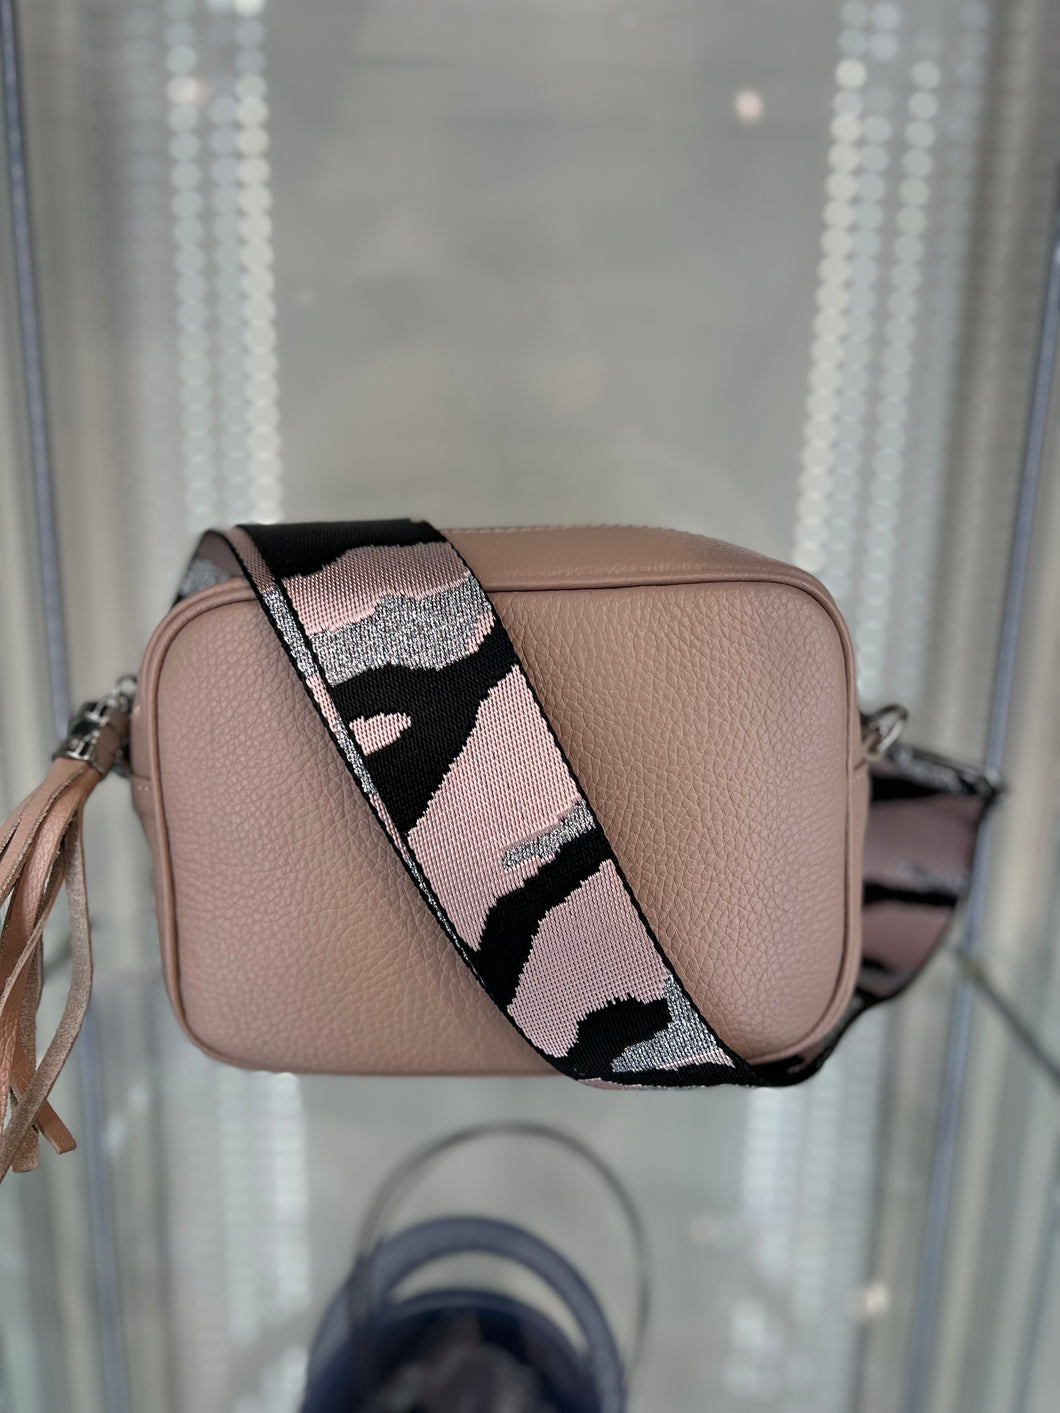 REAL Leather Pale pink Handbag with Camo Strap